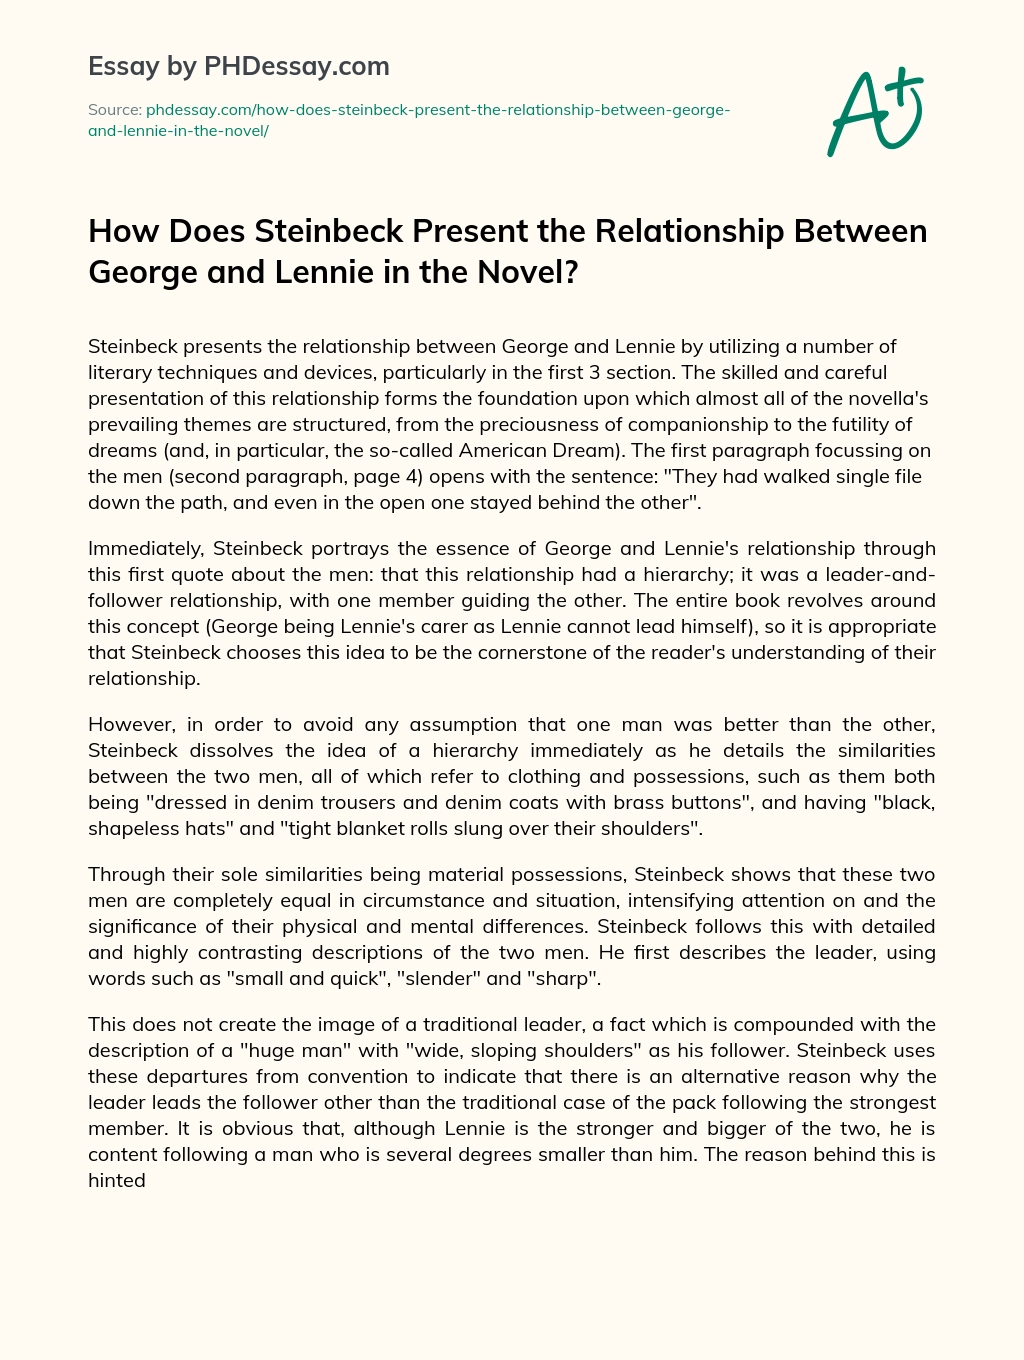 How Does Steinbeck Present the Relationship Between George and Lennie in the Novel? essay